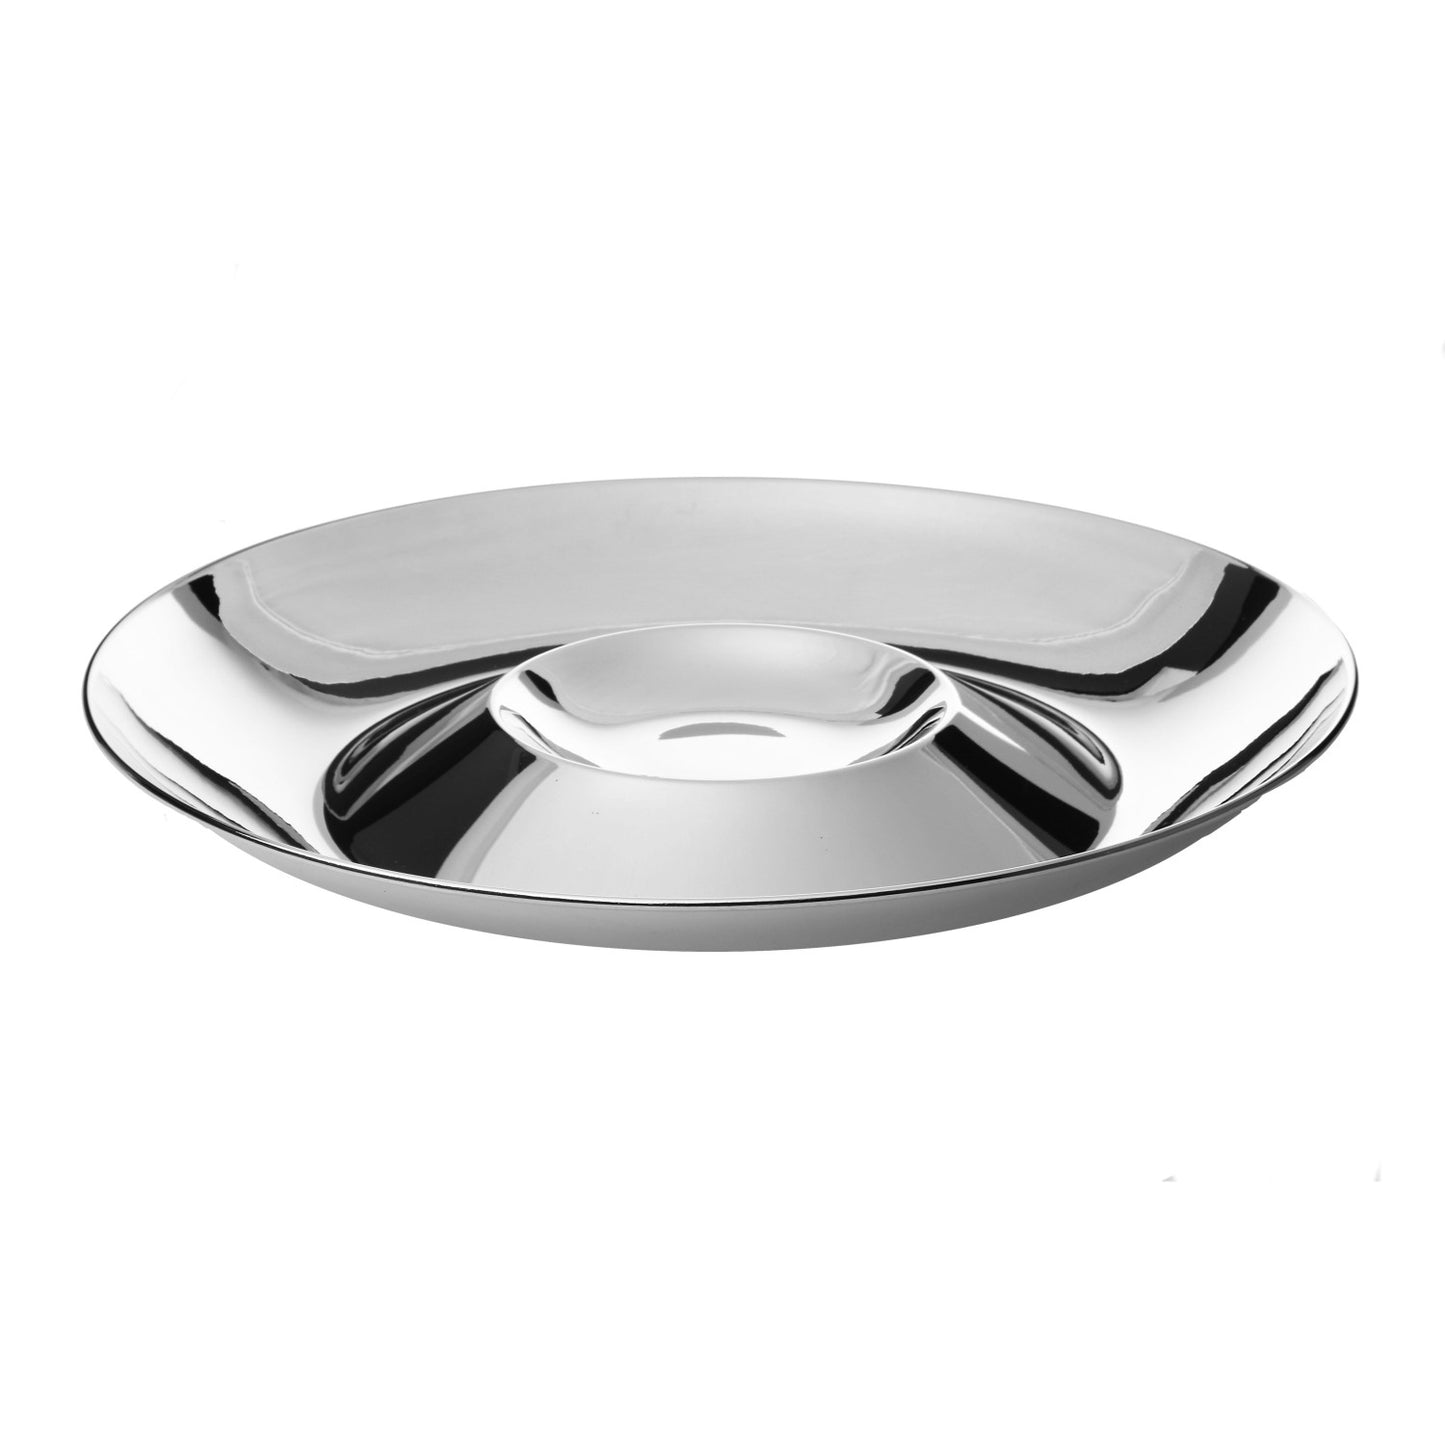 Classic Touch Decor Stainless Steel Chip 'N' Dip Bowl, Silver